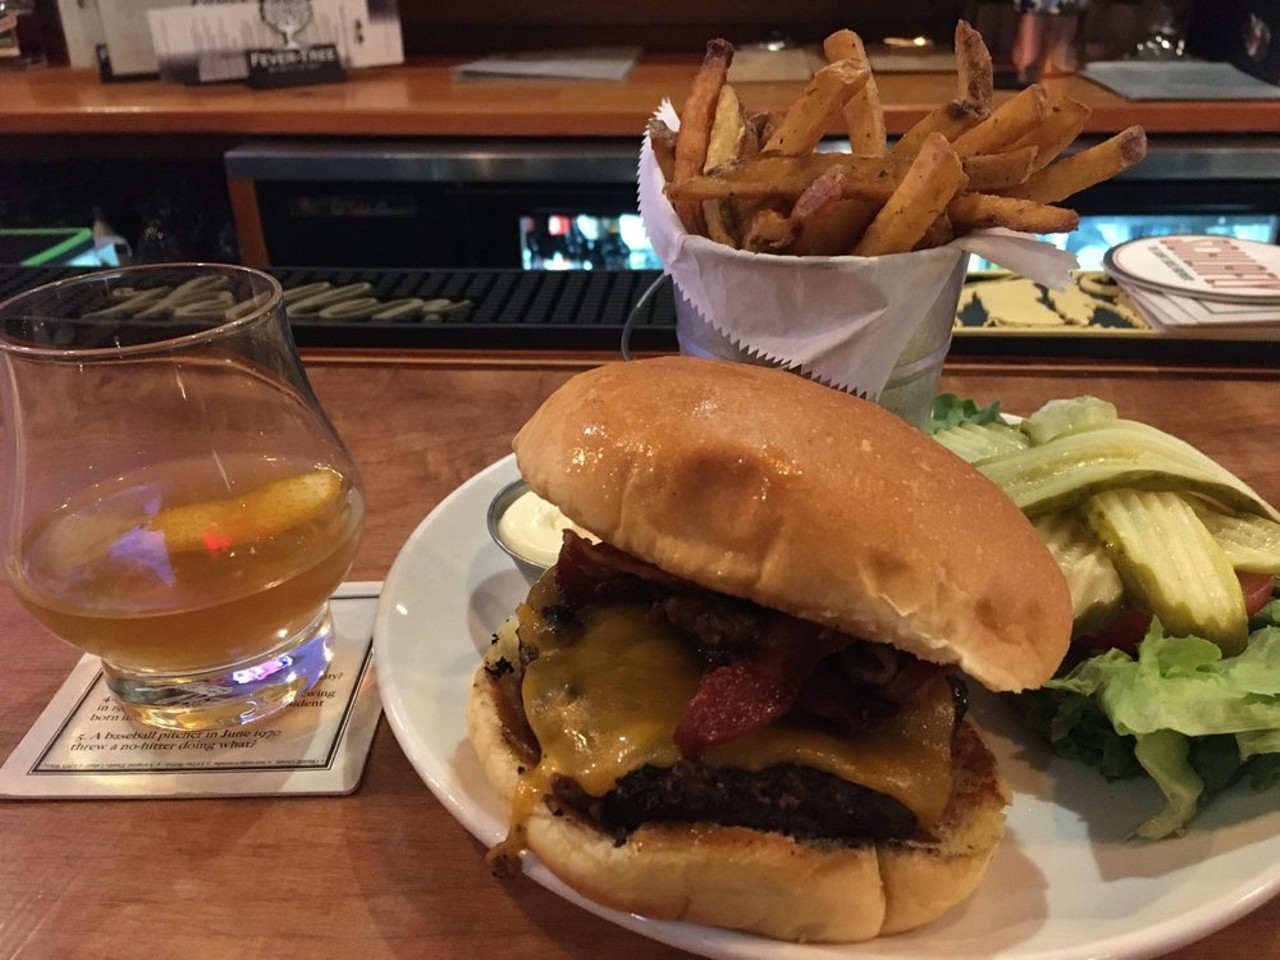 #39: City Park Grill
(3157 Morganford Road; 314-899-9338)
At four-and-a-half stars, Yelpers love this spot. Their reviews can be found here.
Photo credit: Jason P. via Yelp